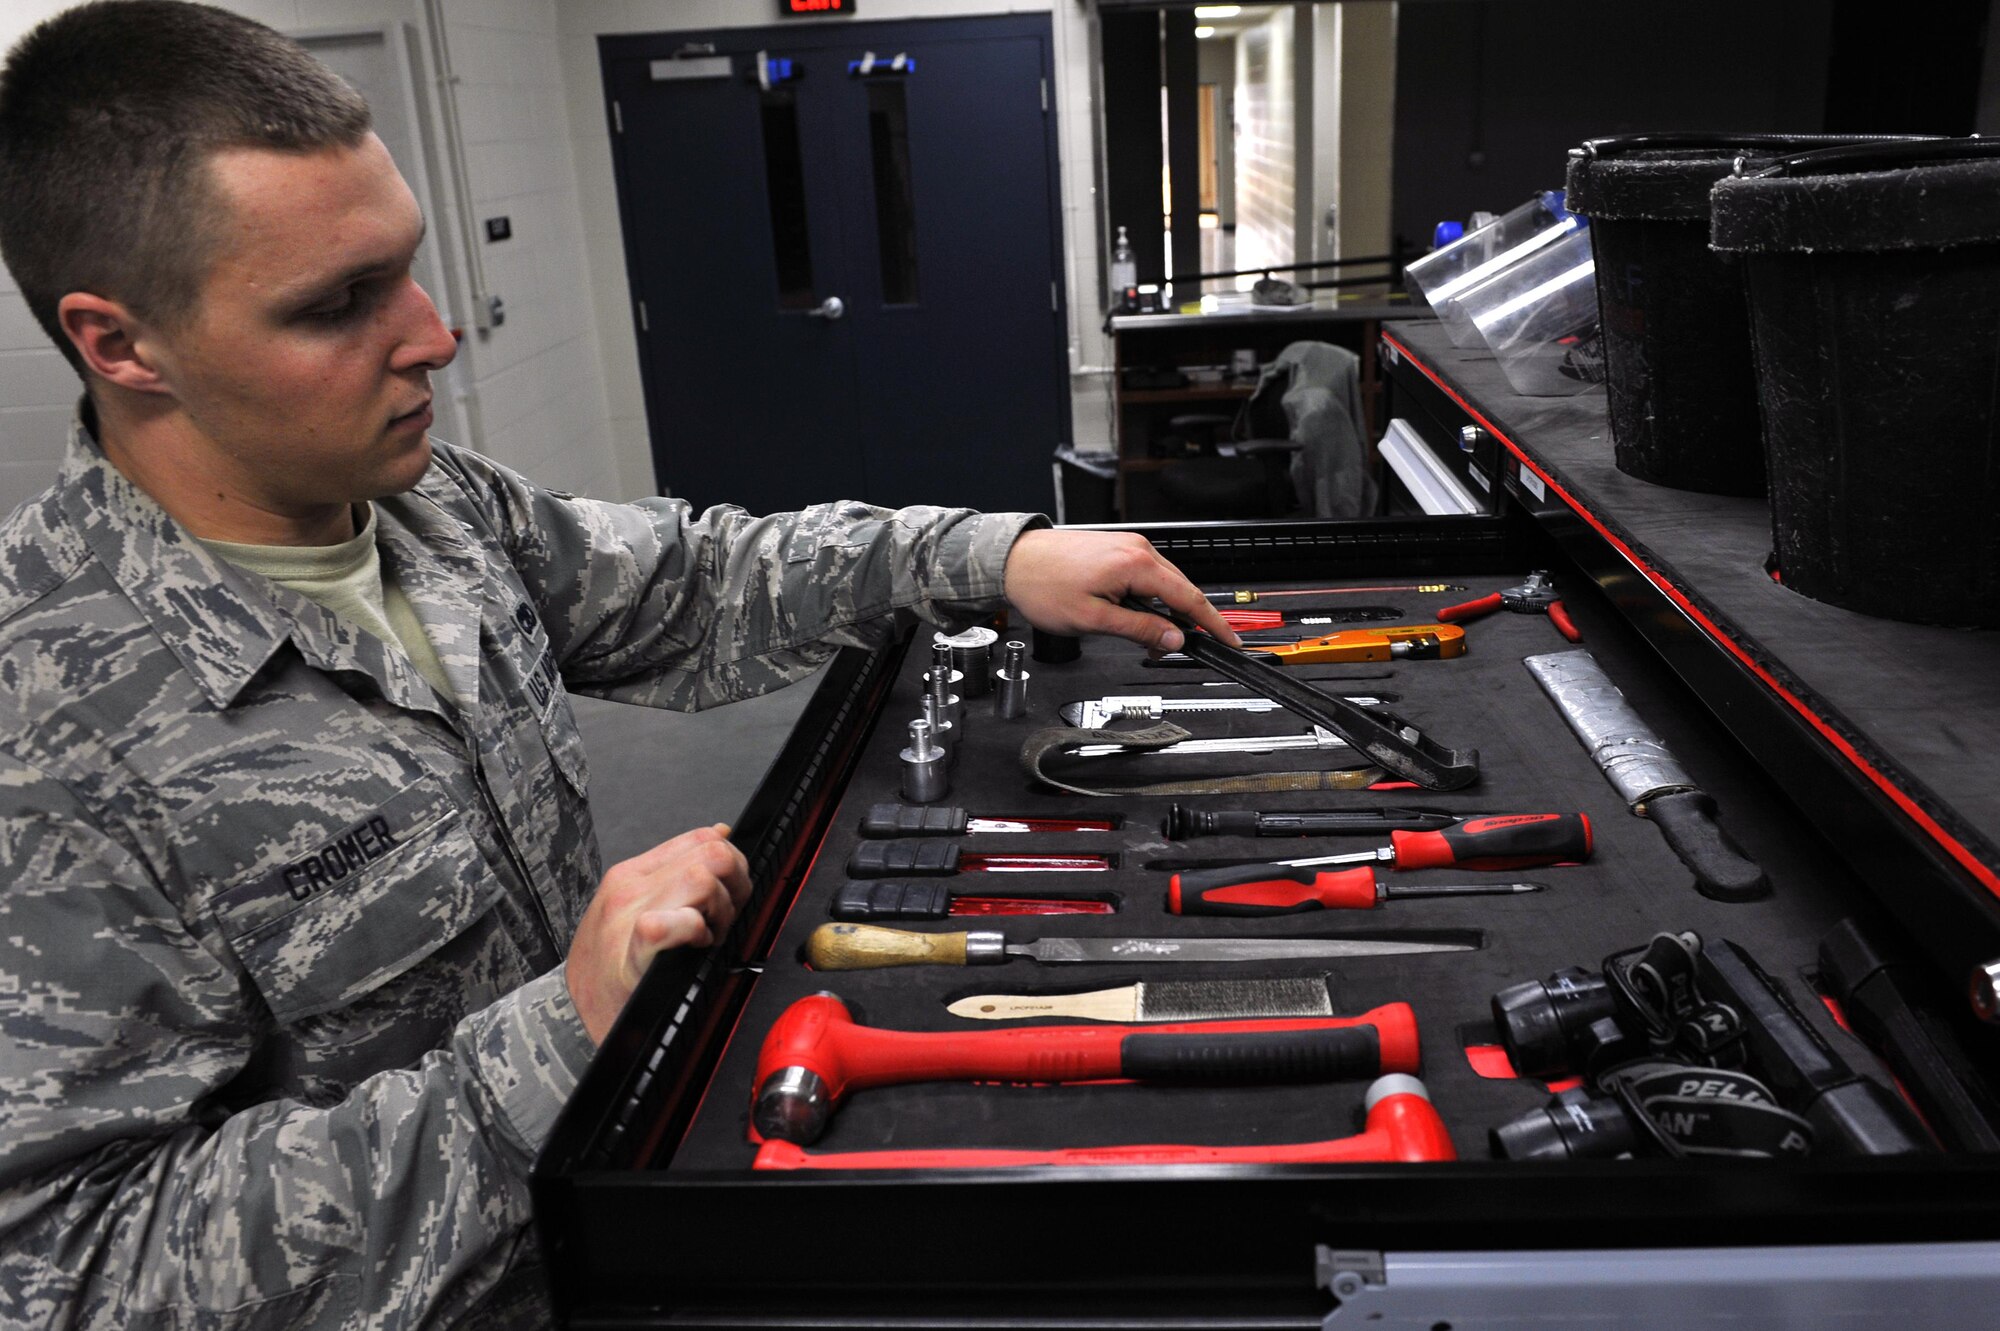 U.S. Air Force Senior Airman Andrew Cromer, 19th Maintenance Squadron aircraft fuel systems repair journeyman, inspects a tool kit Dec. 13, 2016, in Hangar 232 on Little Rock Air Force Base, Ark. The fuel systems shop allows maintainers to check out additional tools necessary to keep the Team Little Rock fleet airborne. (U.S. Air Force photo/Airman 1st Class Kevin Sommer Giron)